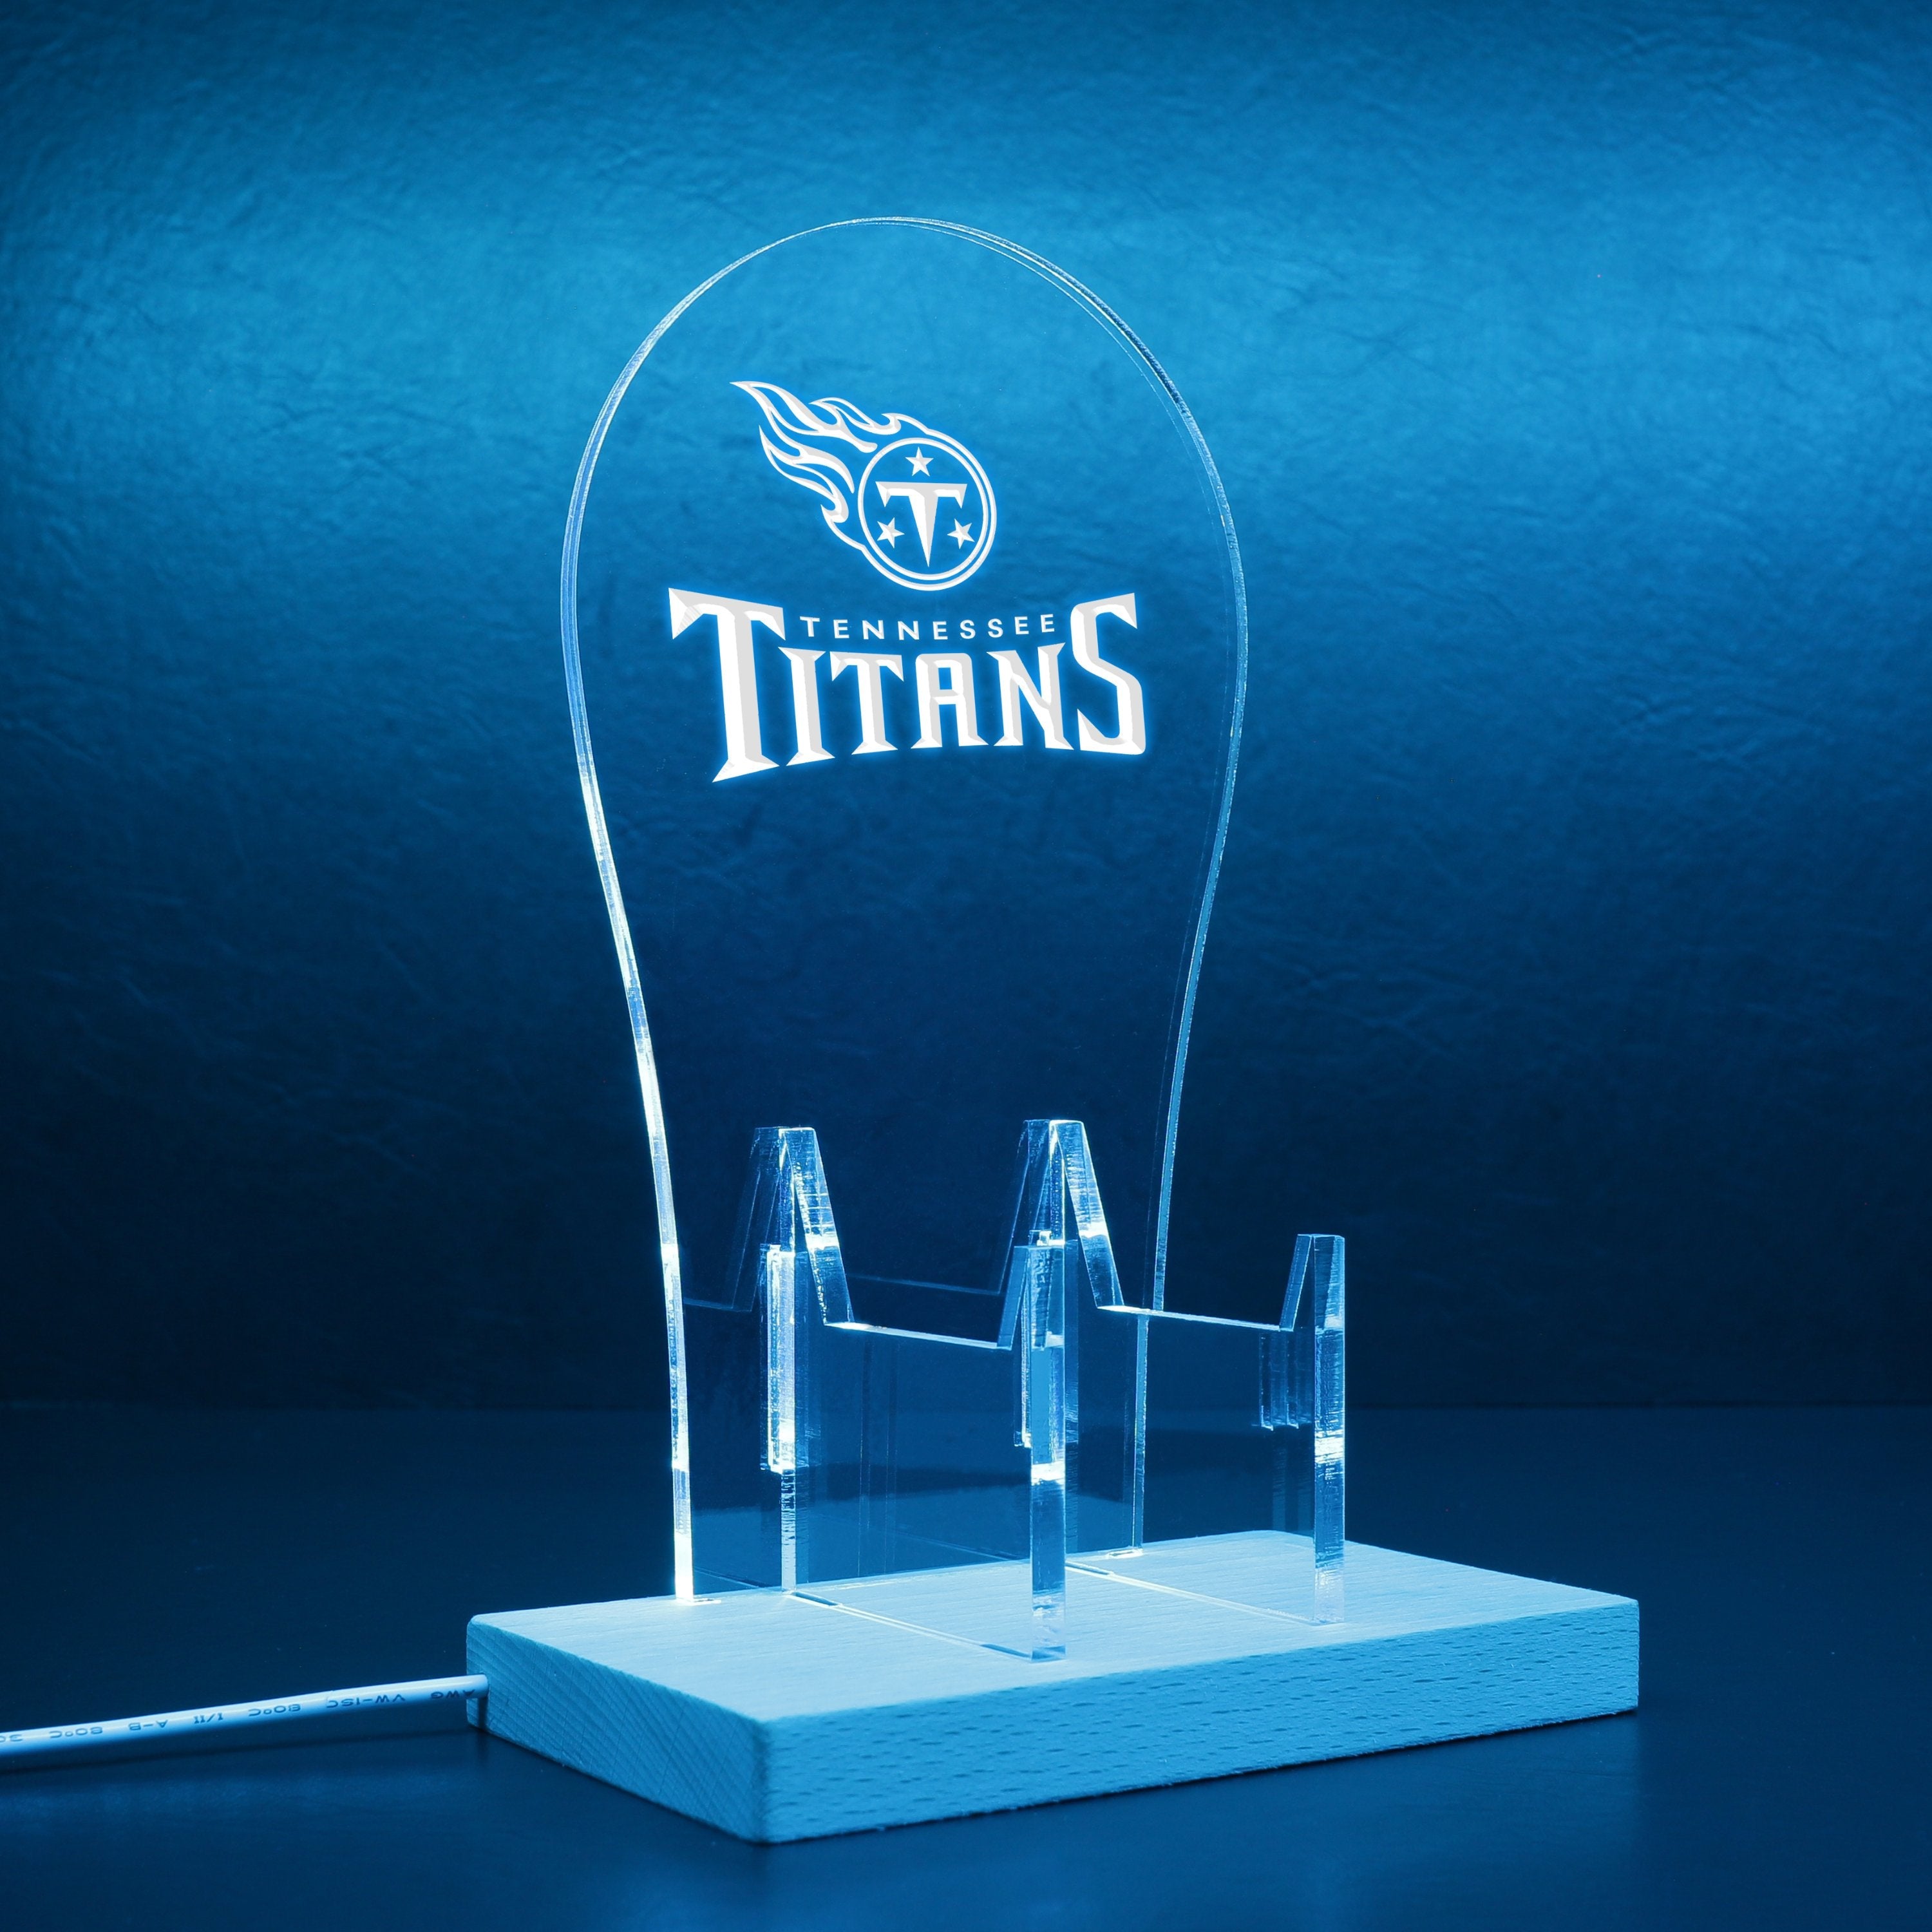 Tennessee Titans LED Gaming Headset Controller Stand